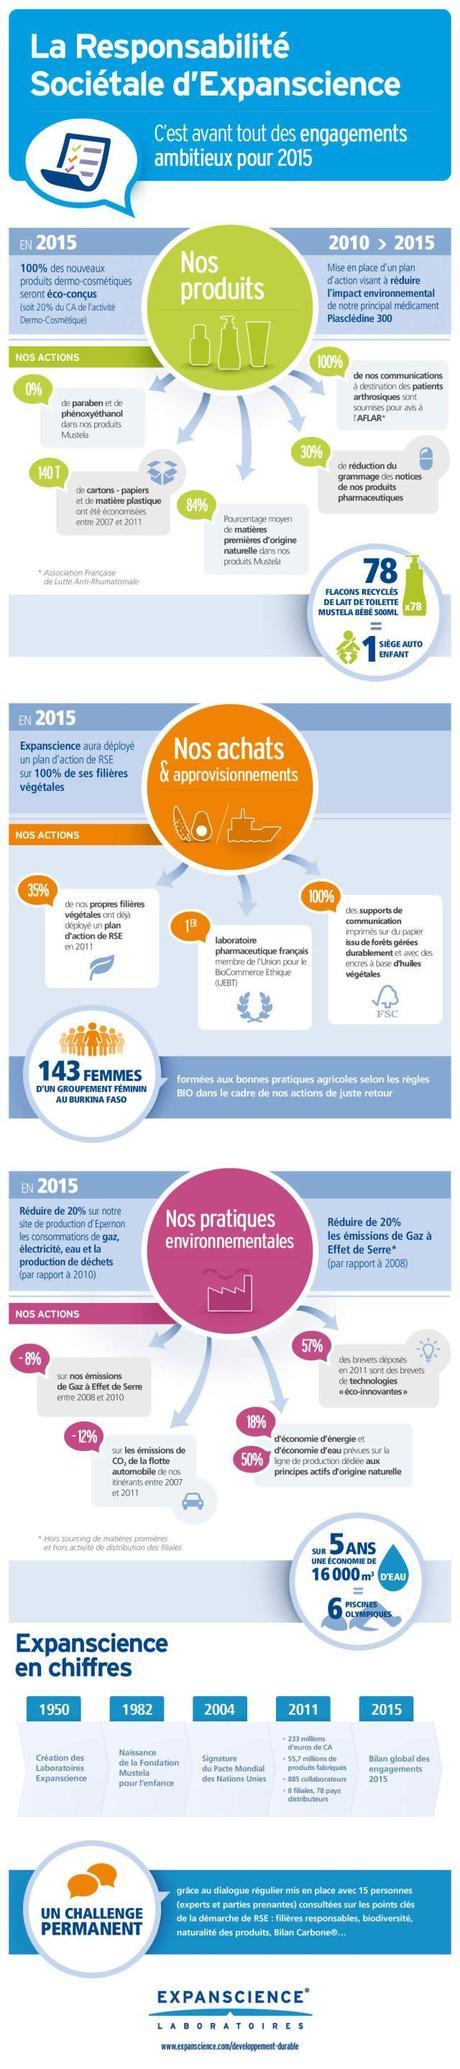 expanscience_infographic_FR